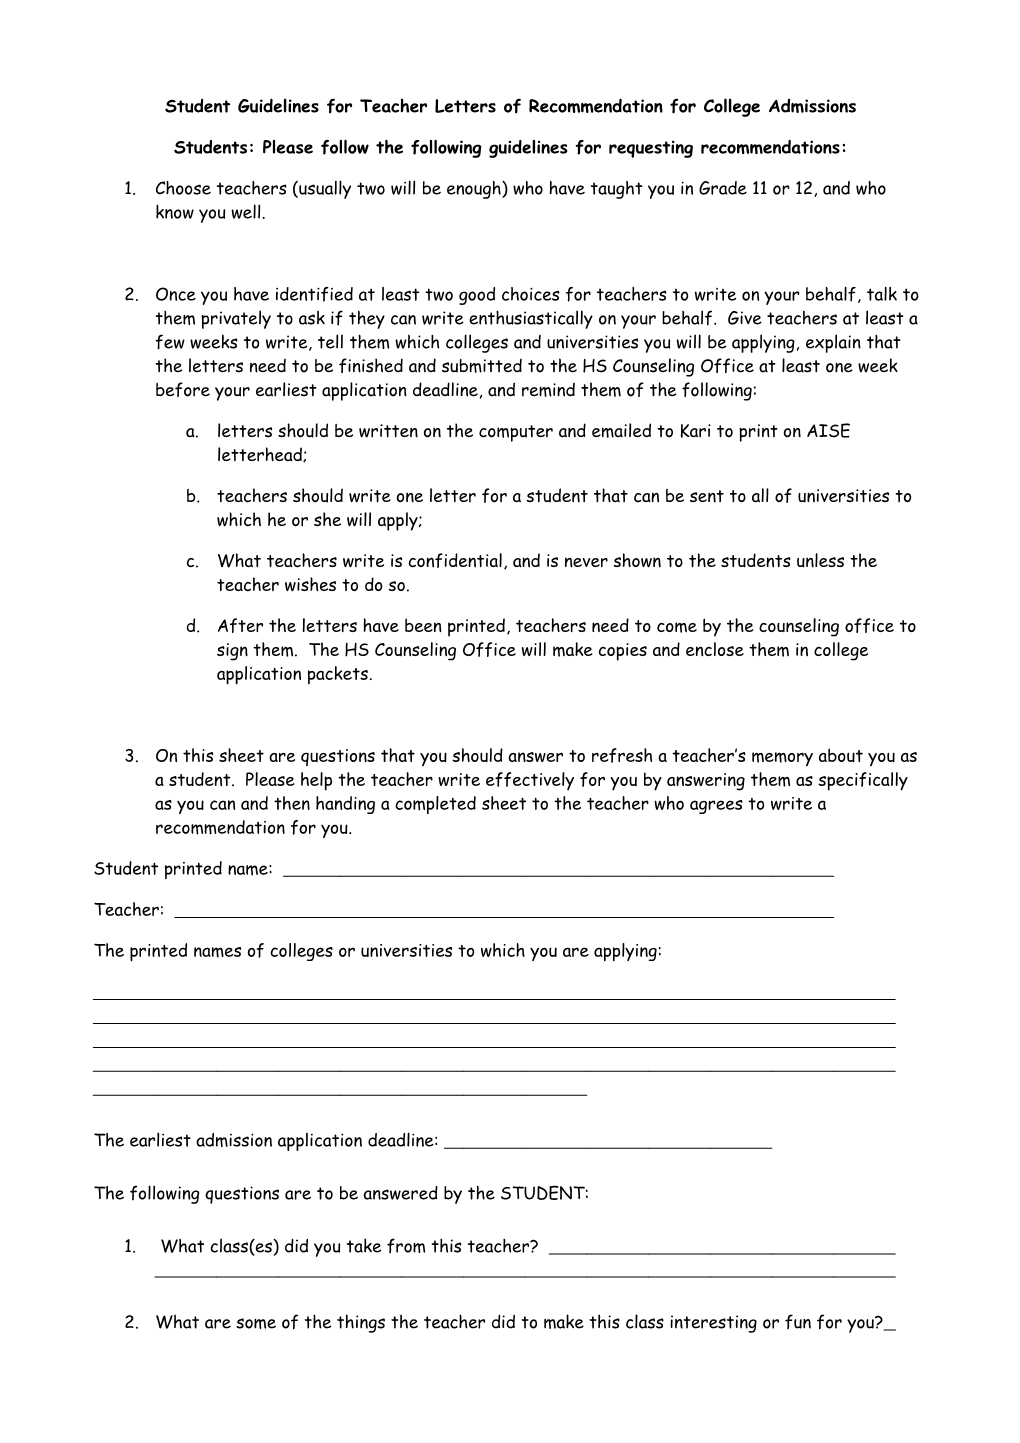 Student Guidelines for Teacher Letters of Recommendation for College Admissions